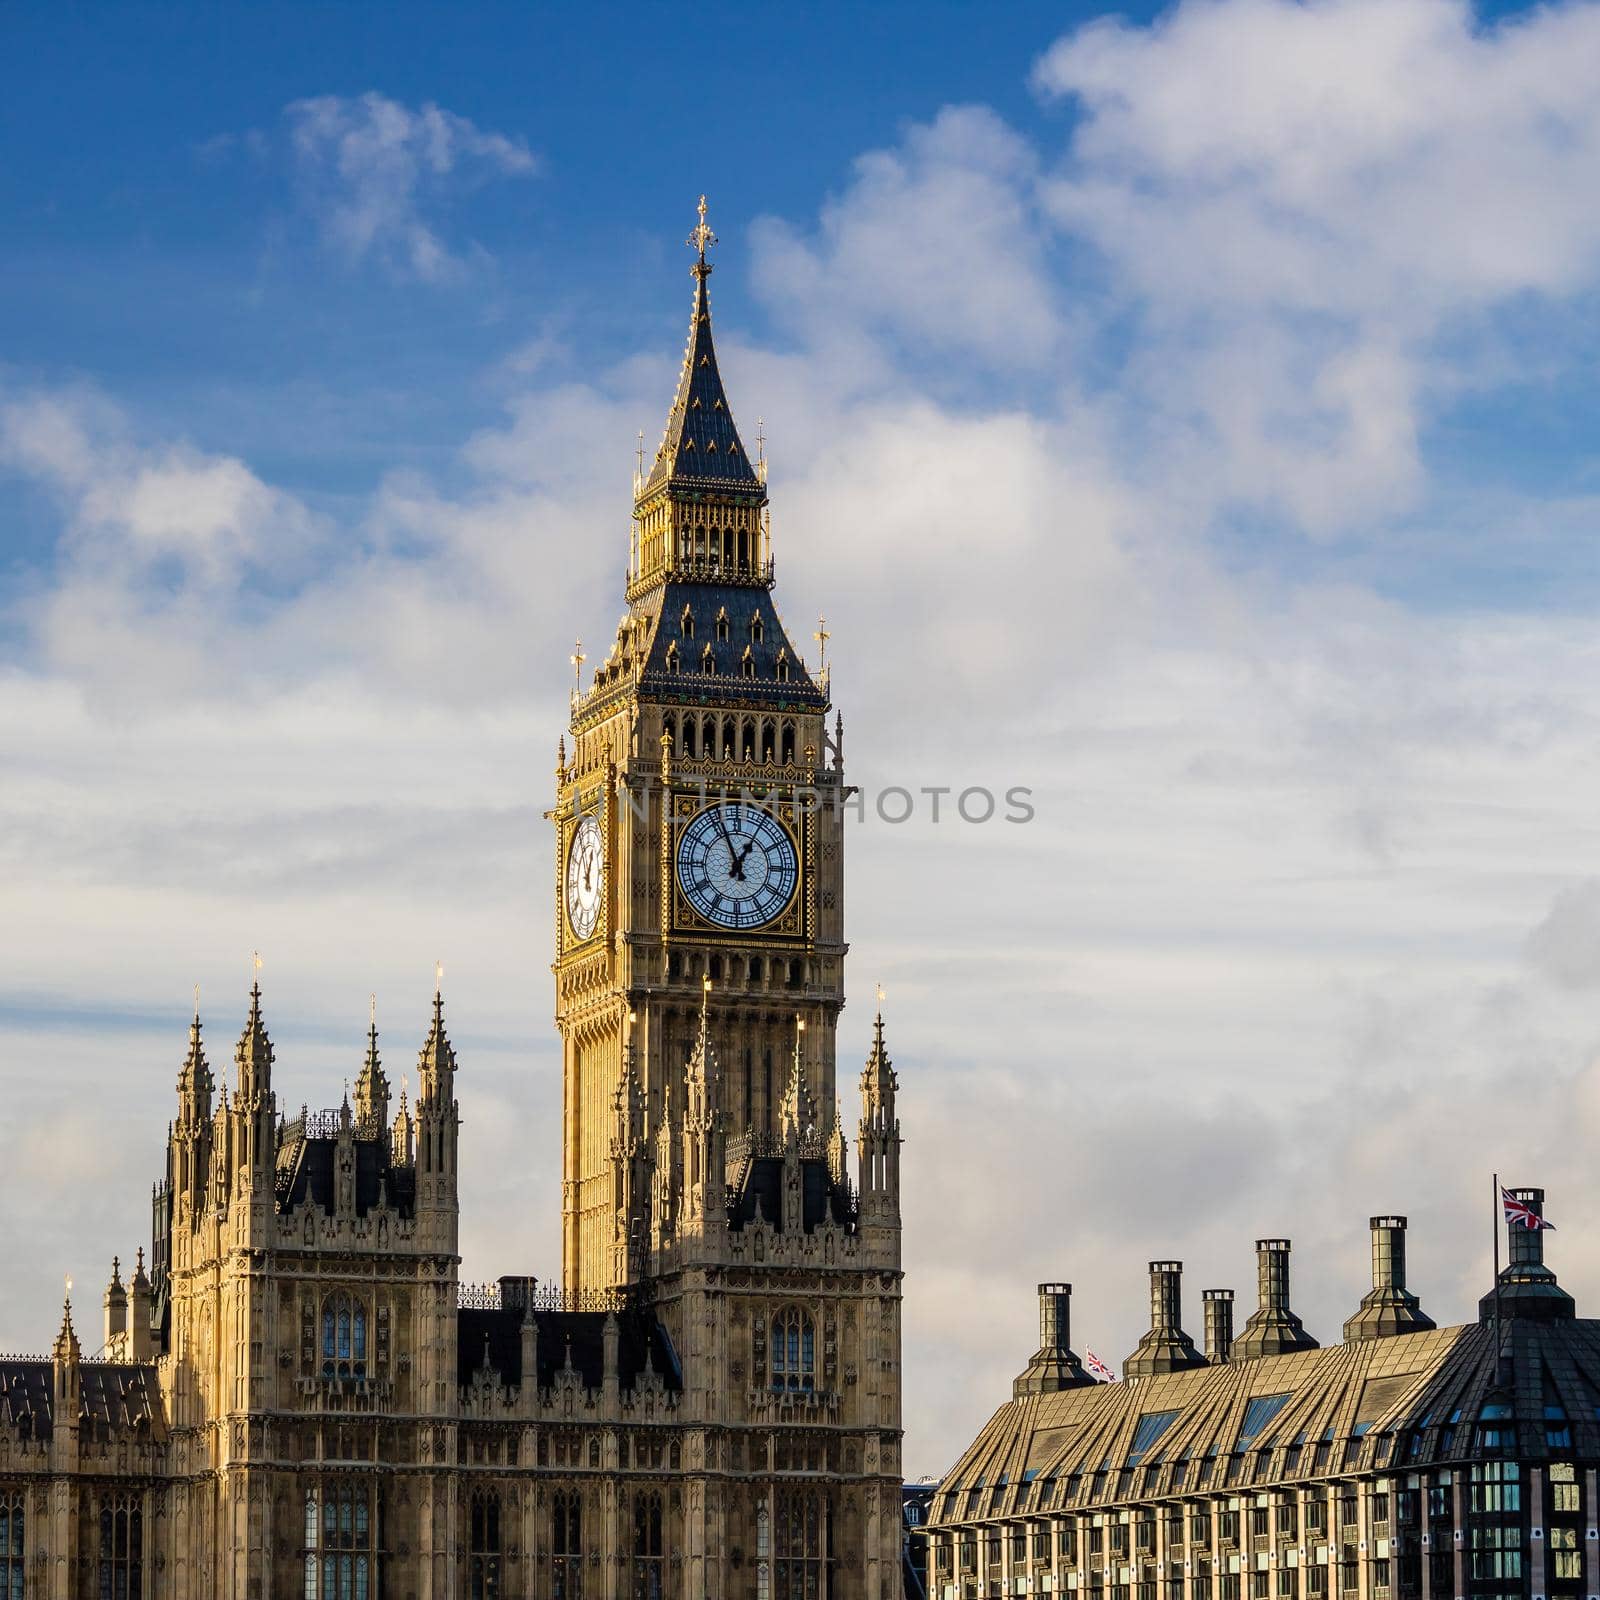 Big Ben and Houses of Parliament by f11photo